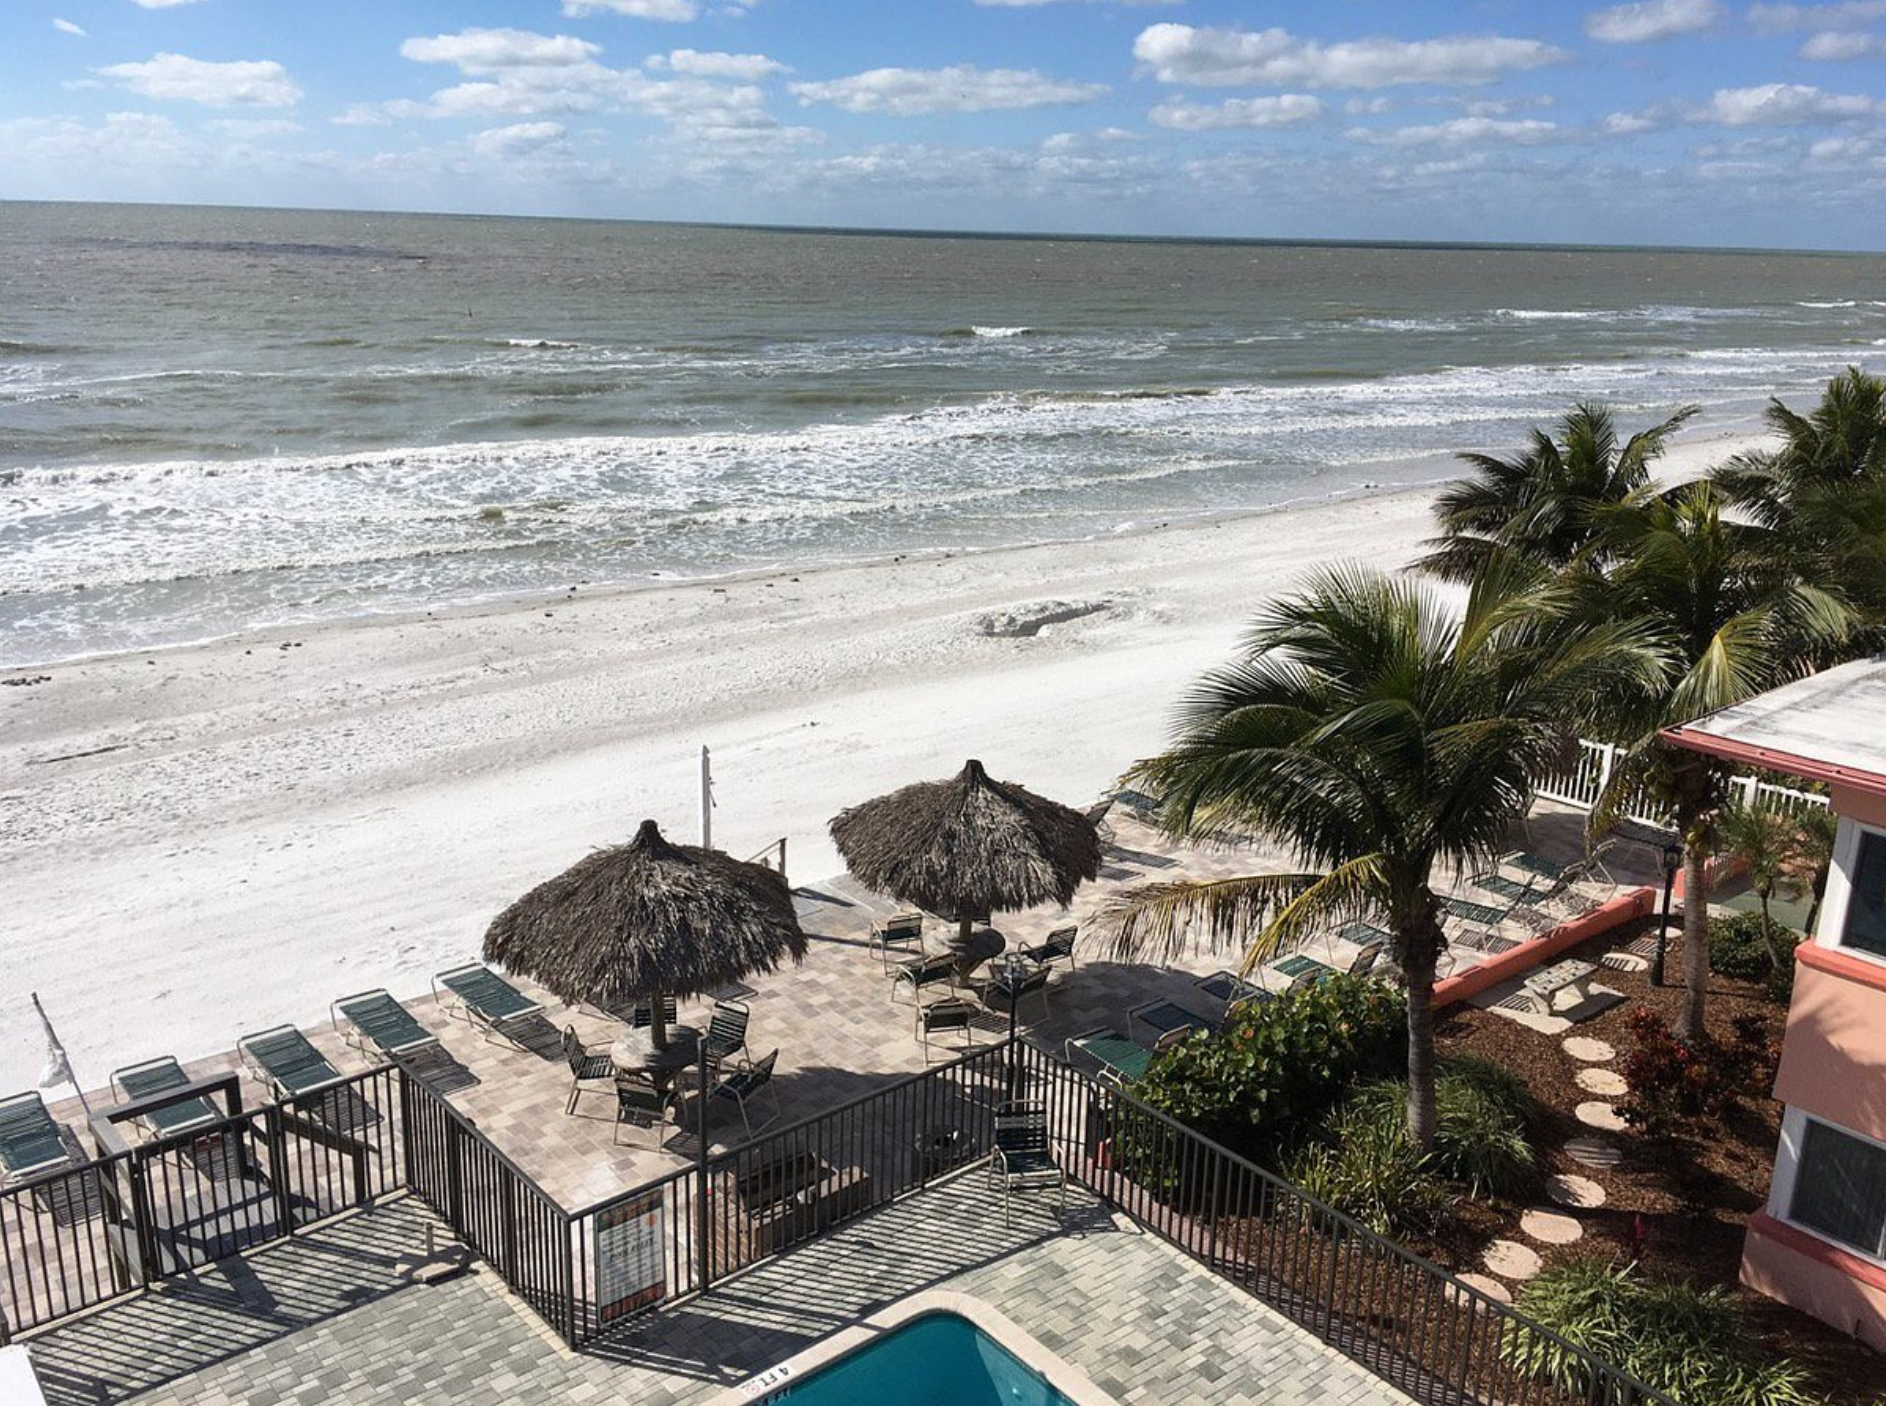 Coral Shores Resort is a beachfront property on Florida's Gulf Coast.